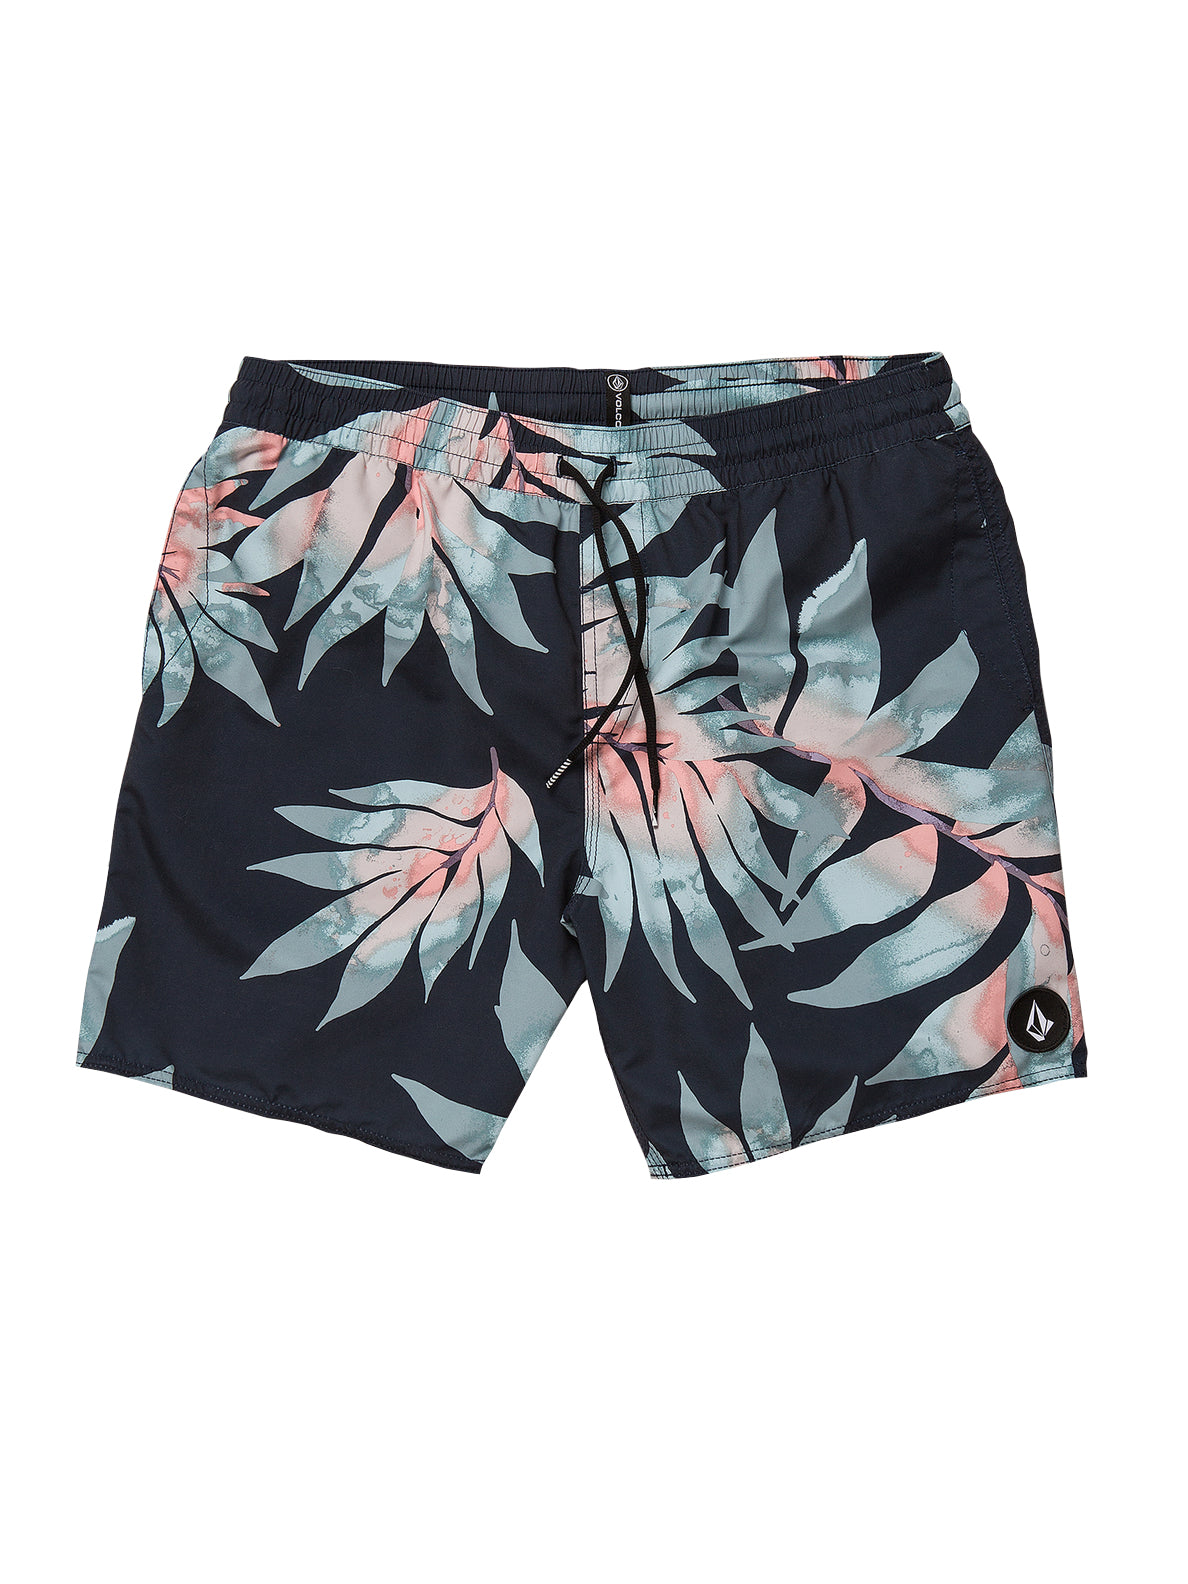 VOLCOM POLLY PACK TRUNK 17 NVY L